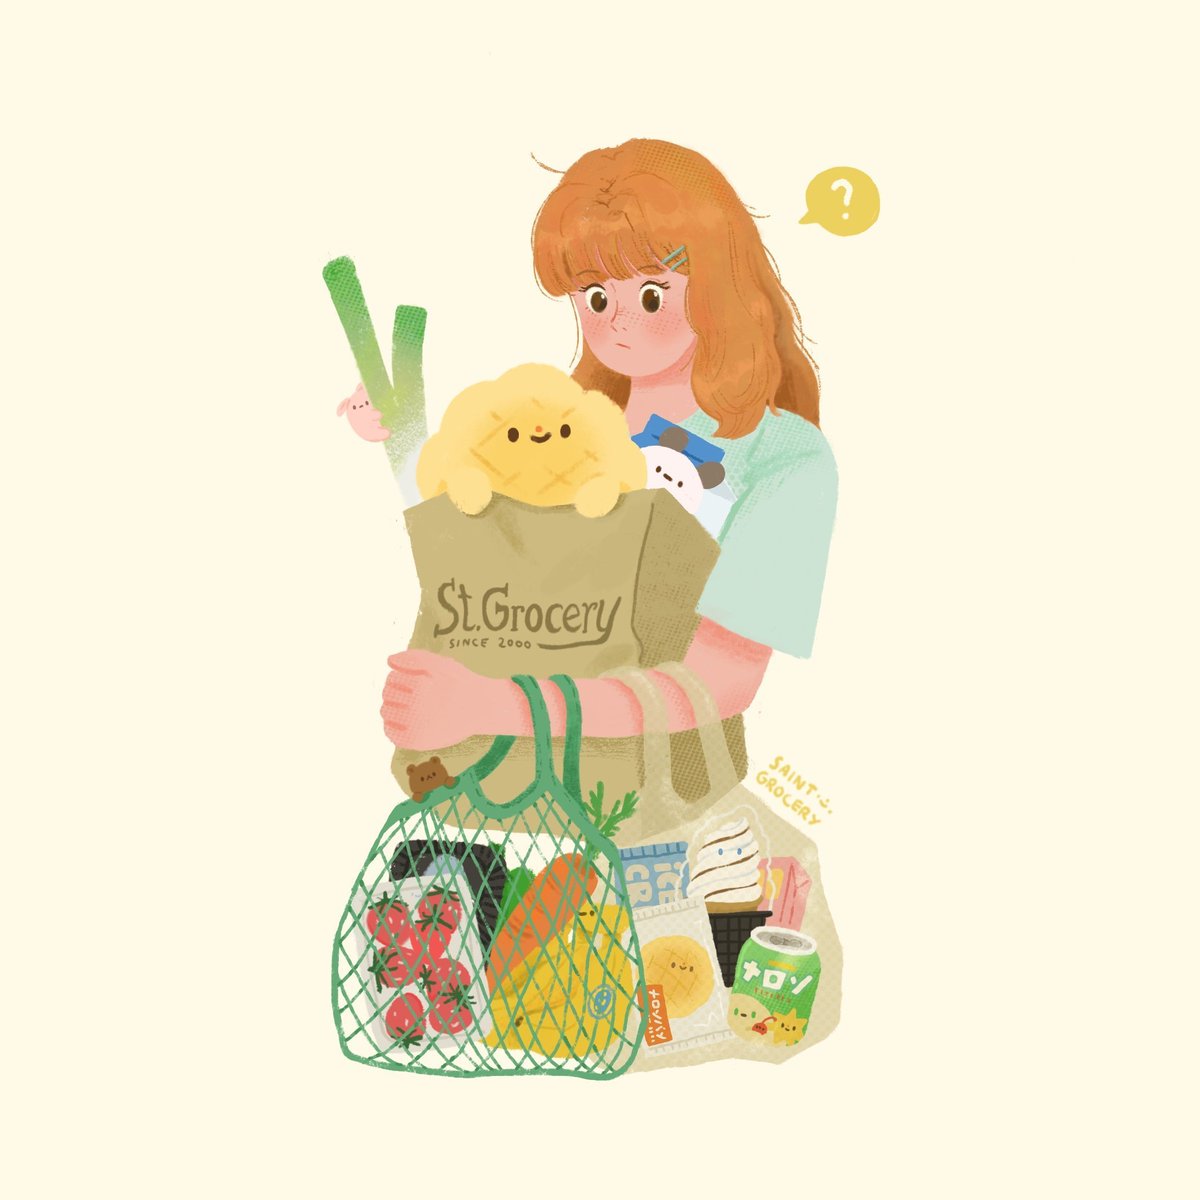 Hi! I'm an illustrator who loves to draw food and cute things, and I also love to do clay charms💗✨ nice to meet you!

ig : saintgrocery 

#ThaiKidsIllustrator #ThaiBCBF2022